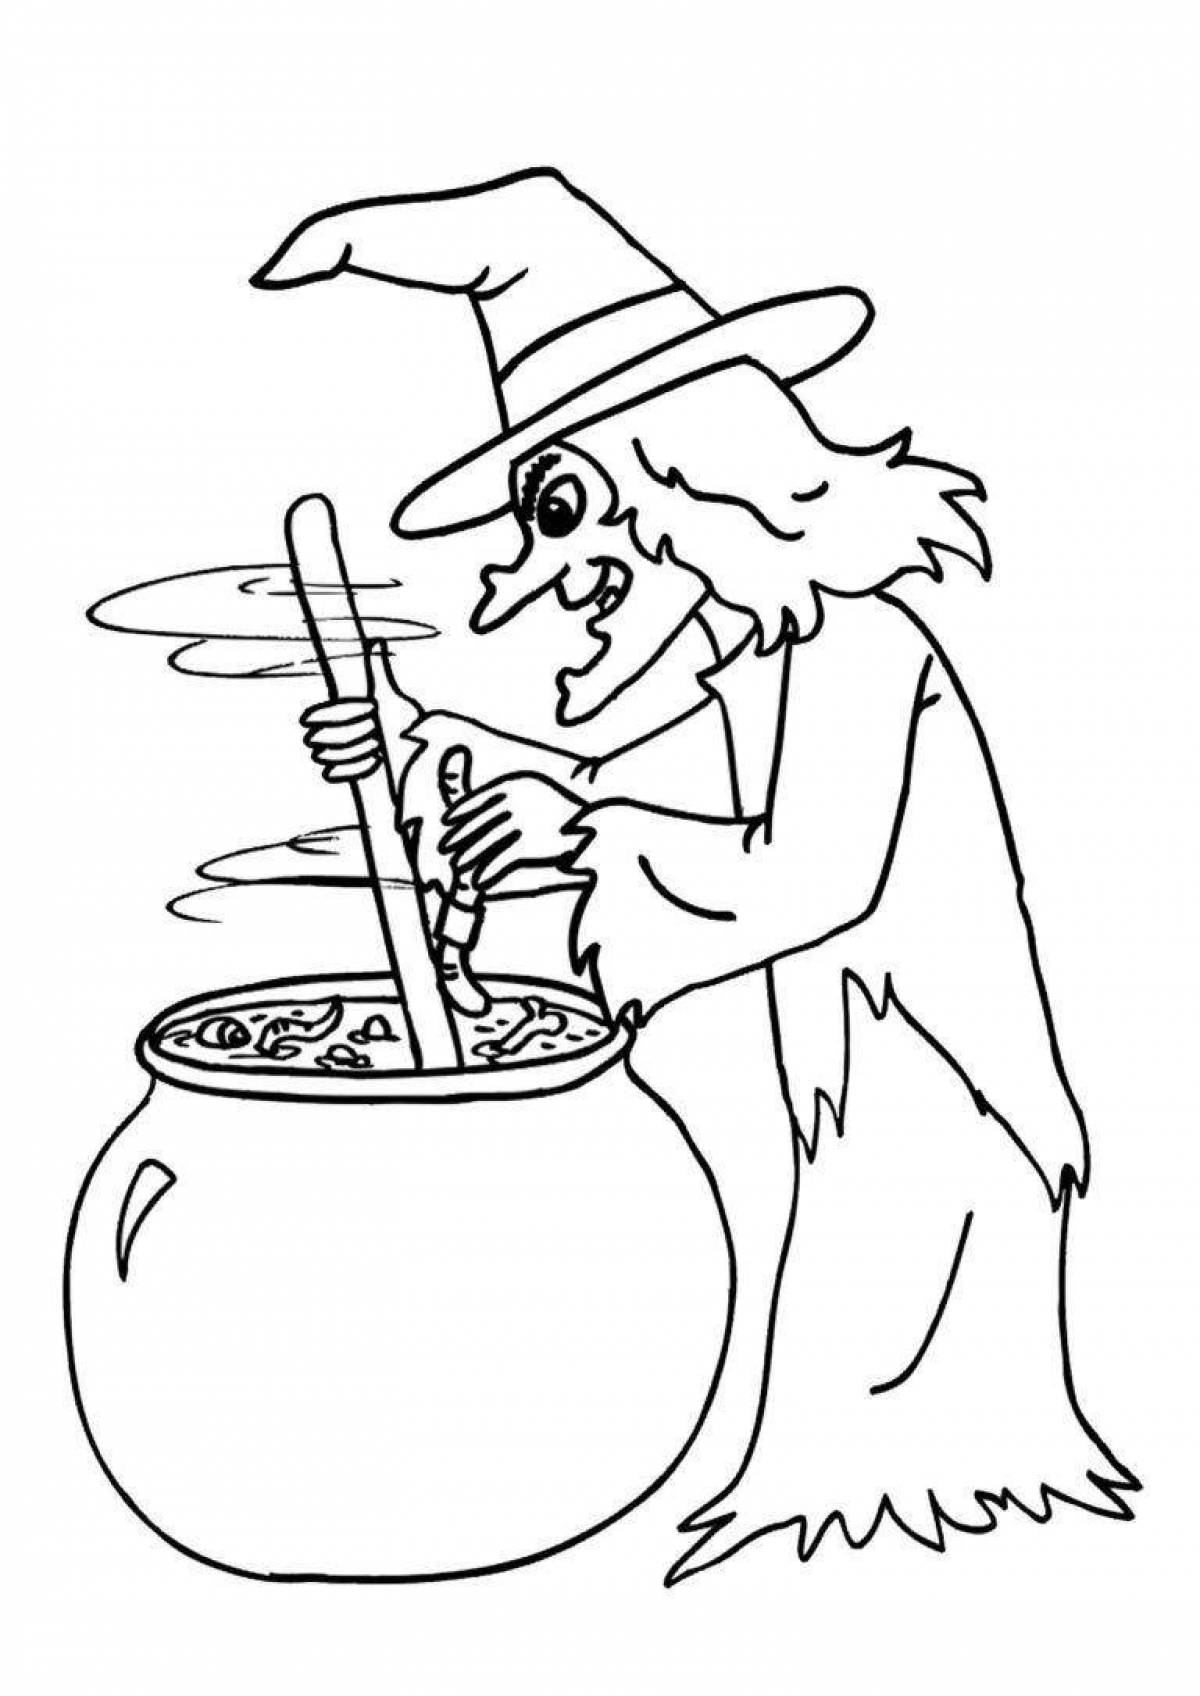 Sinister witch coloring book